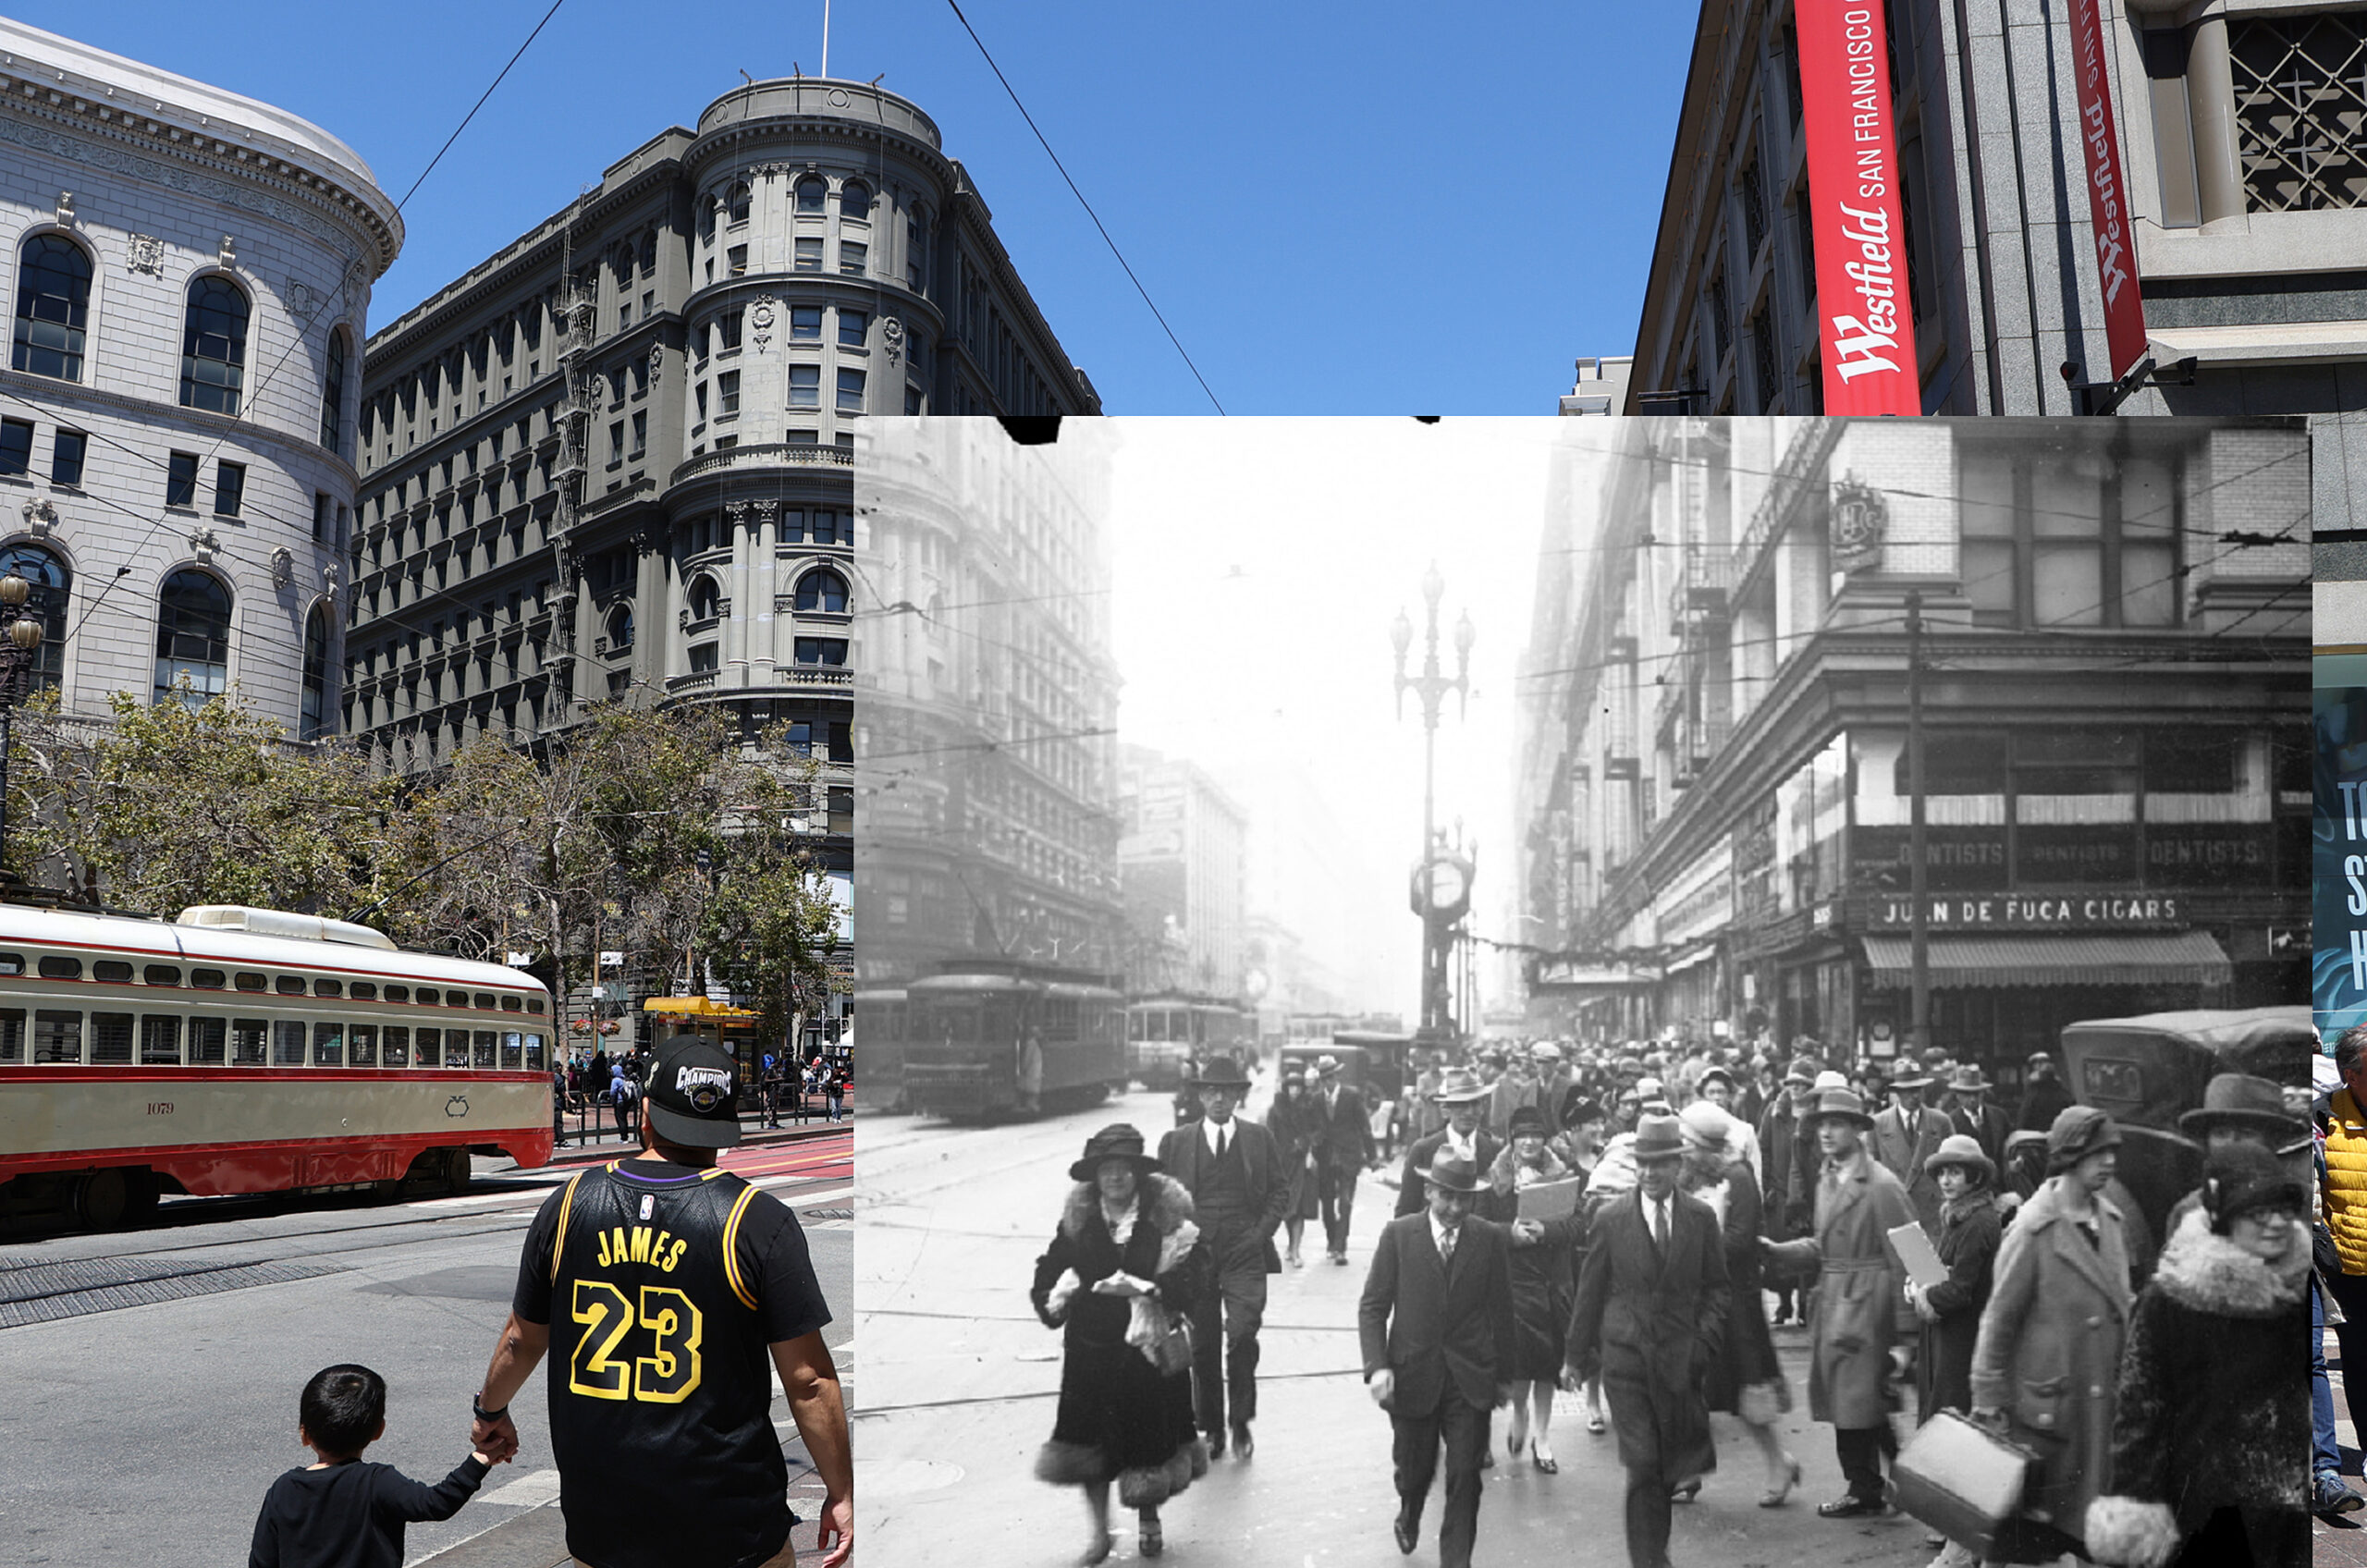 SF then/now: The hidden history at the corner of Fifth and Market